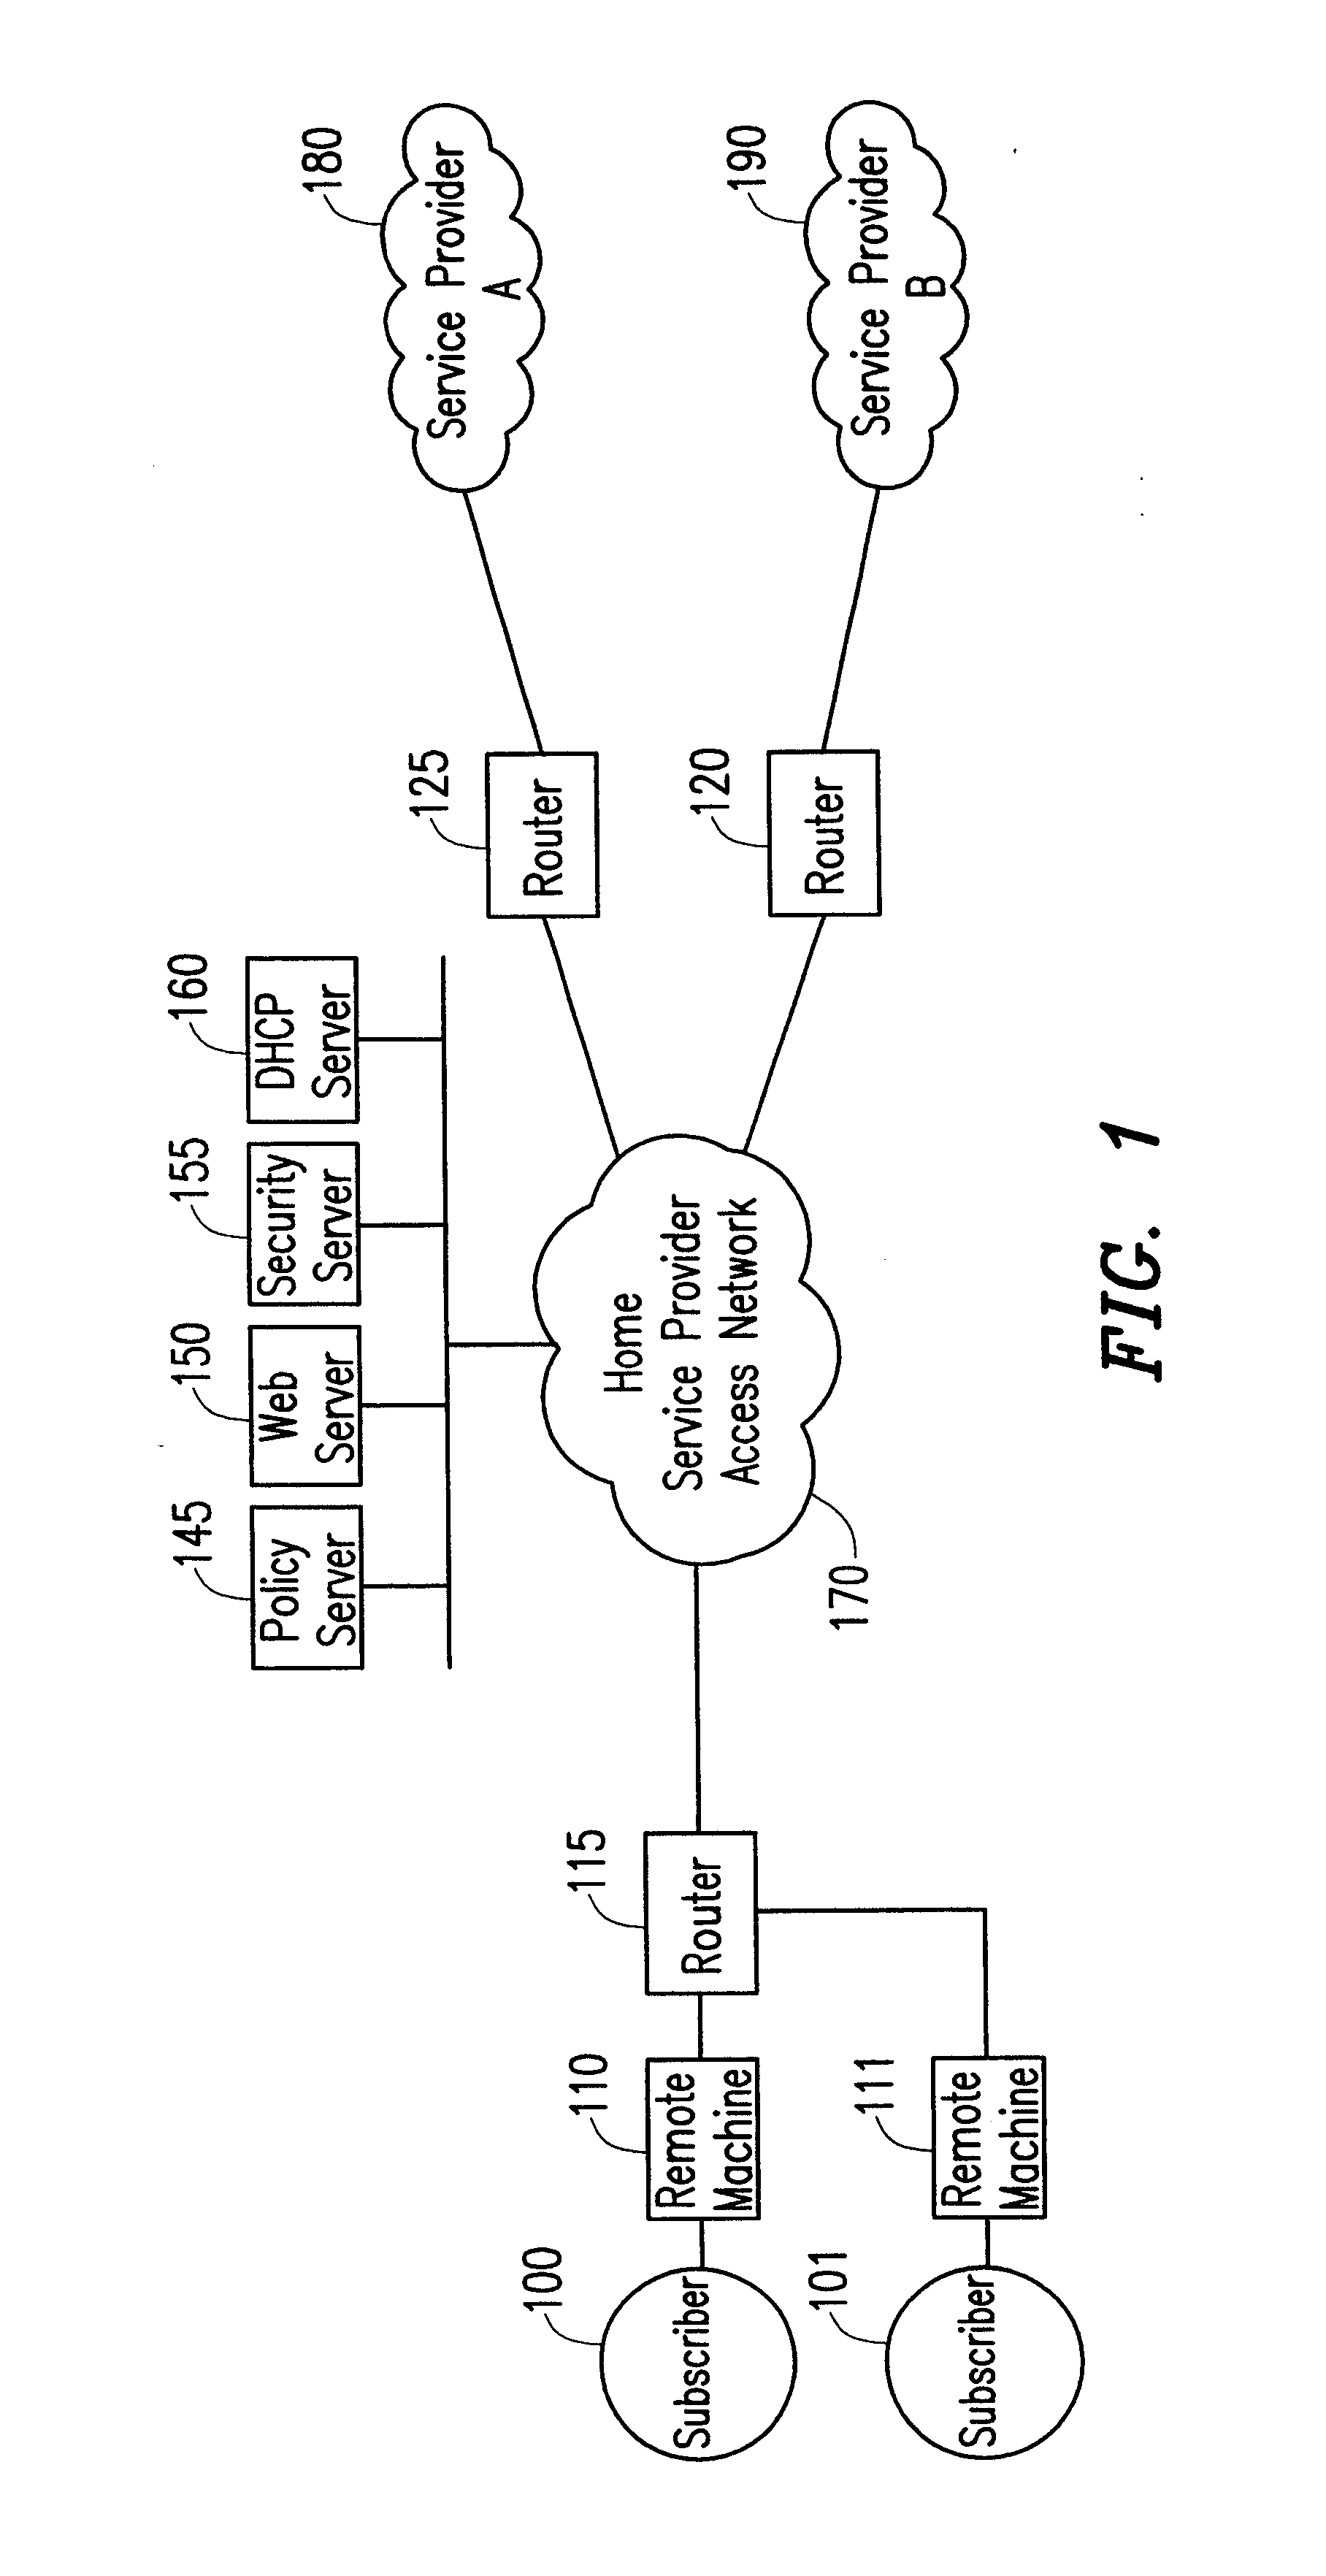 System and method for dynamic simultaneous connection to multiple service providers